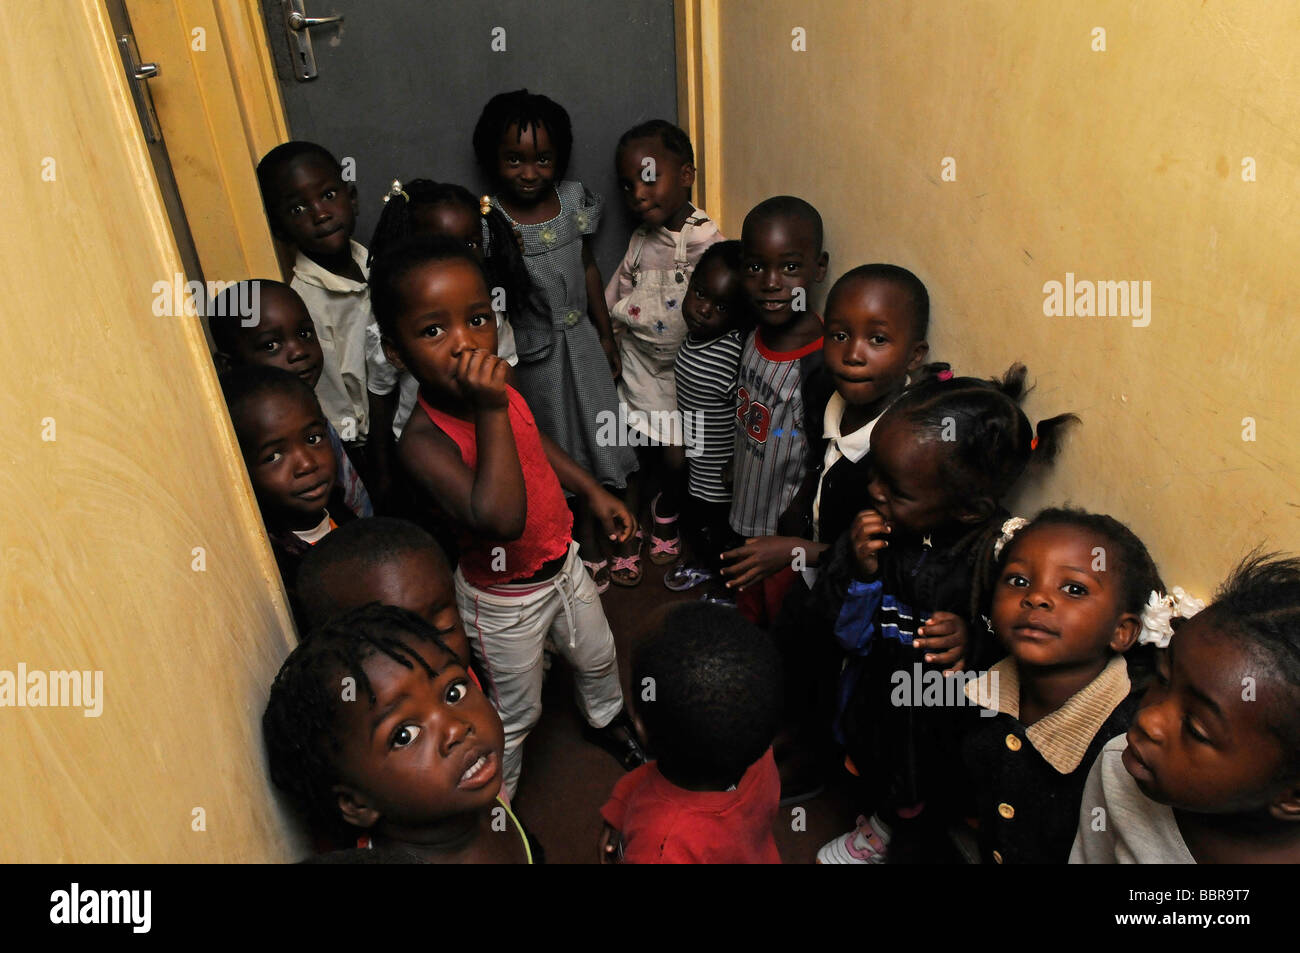 An orphanage in Central Africa Stock Photo